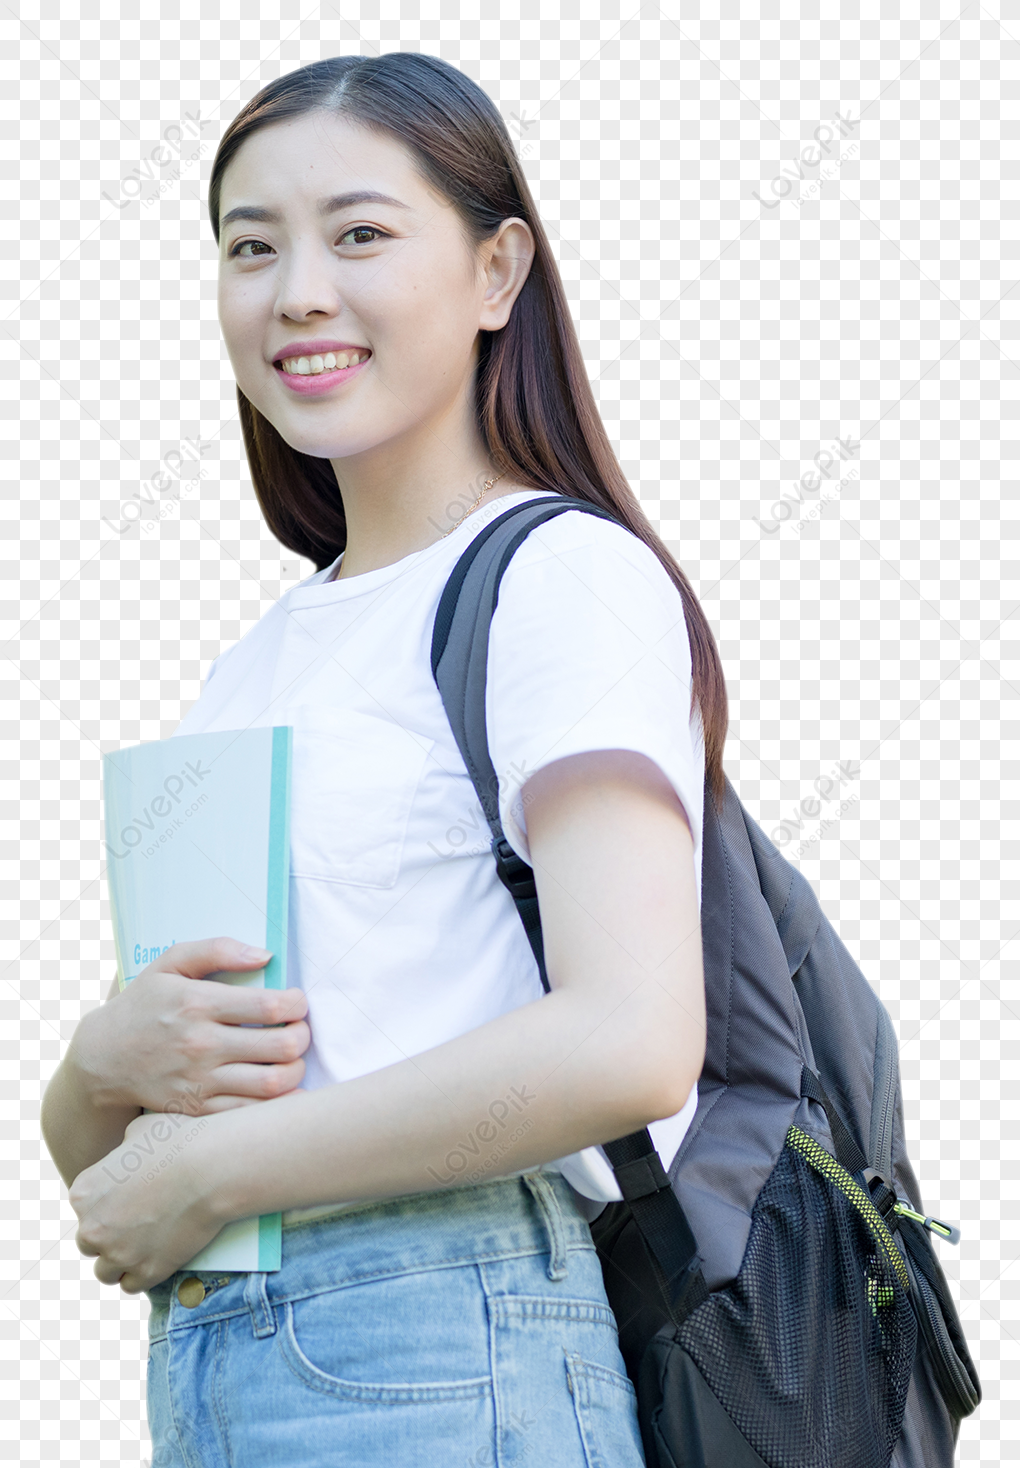 college student walking png